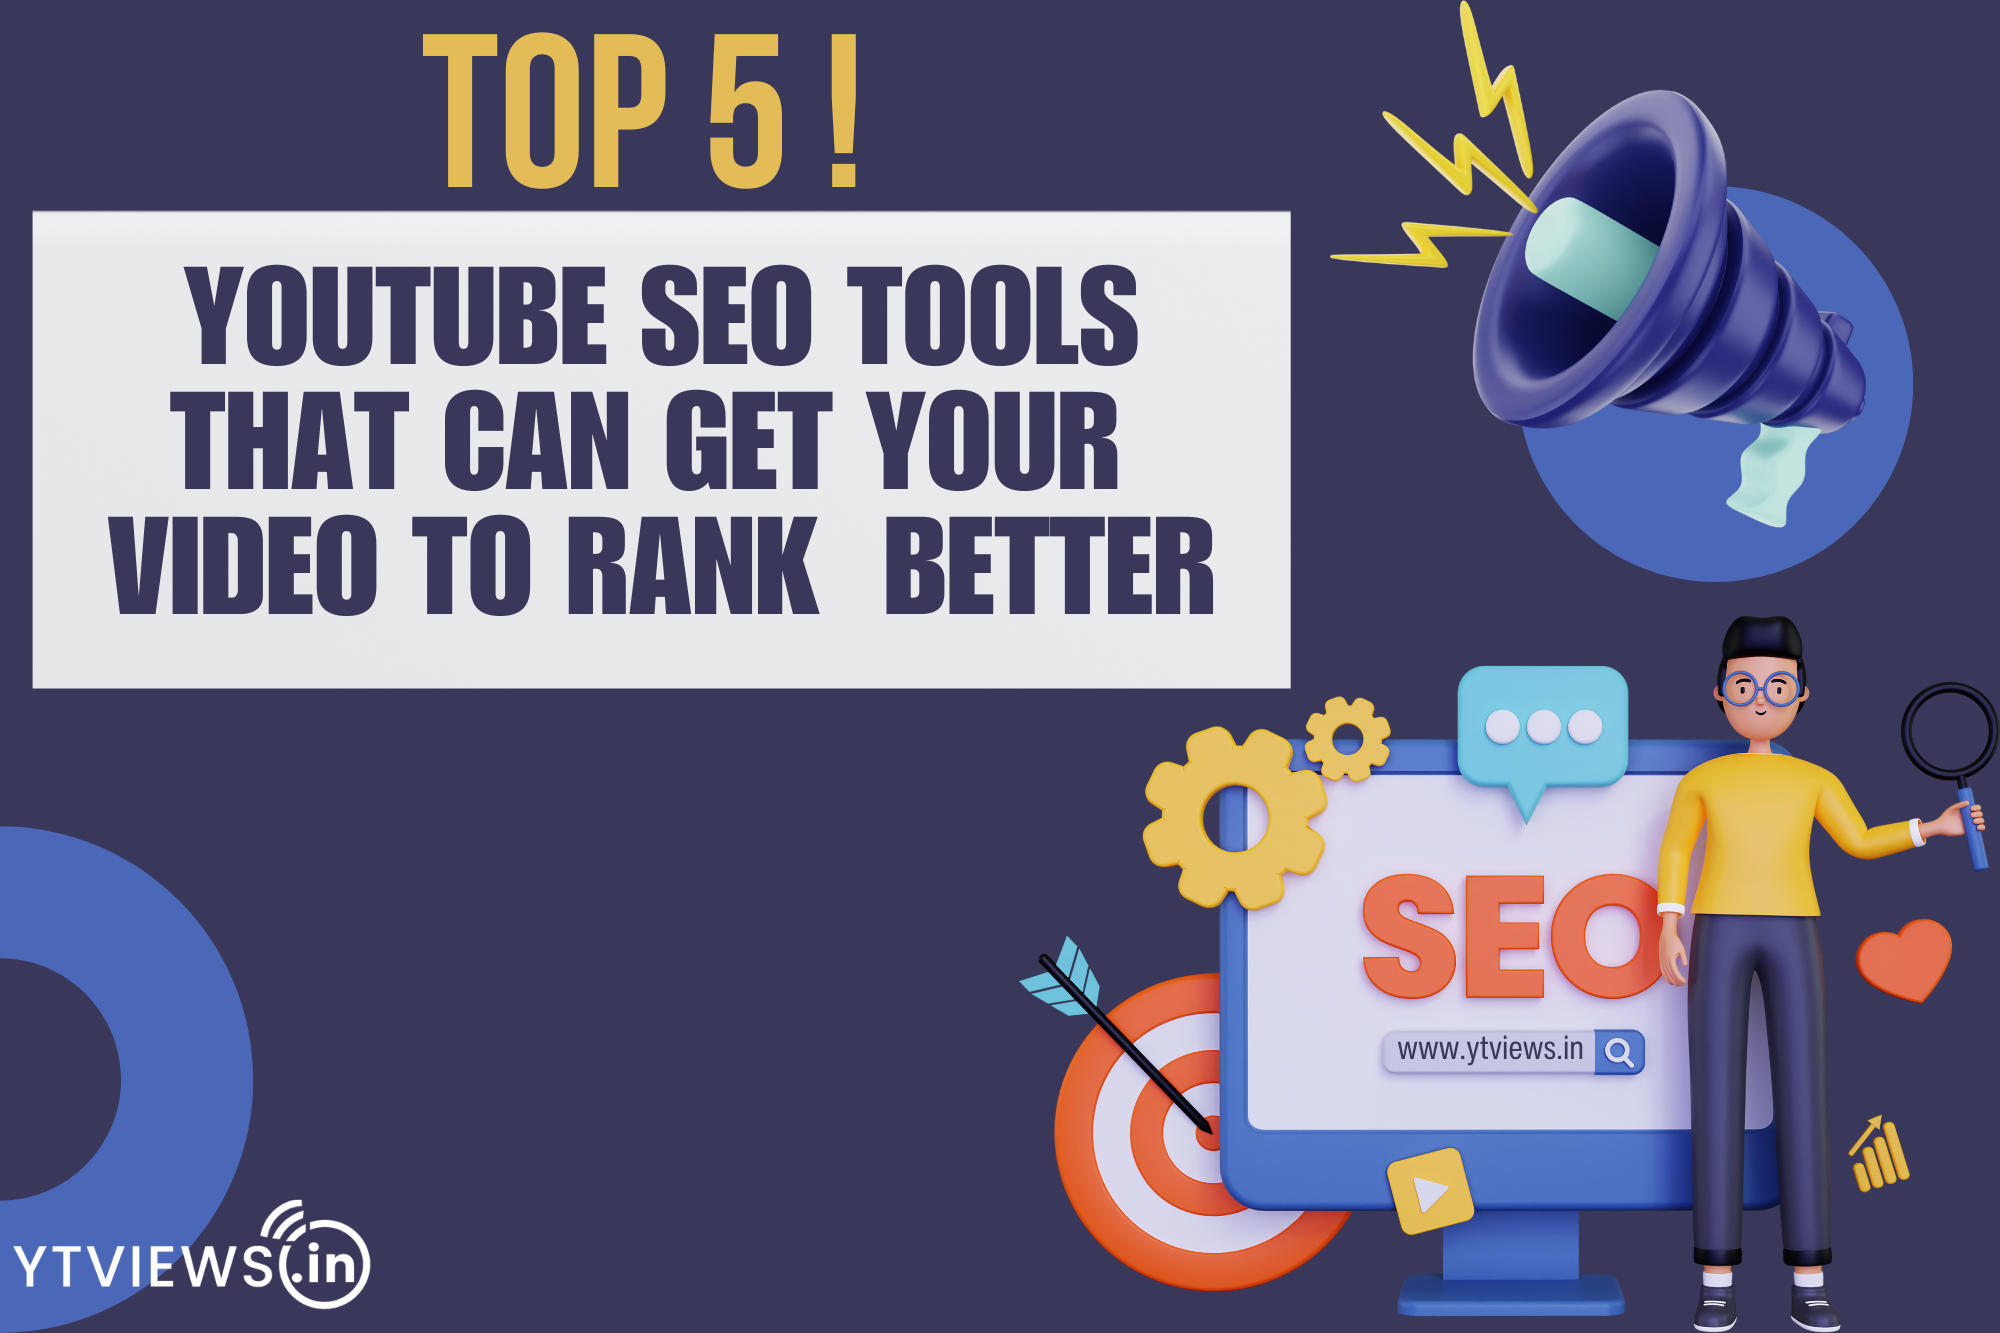 Top 5 YouTube SEO tools that can get your video to rank better